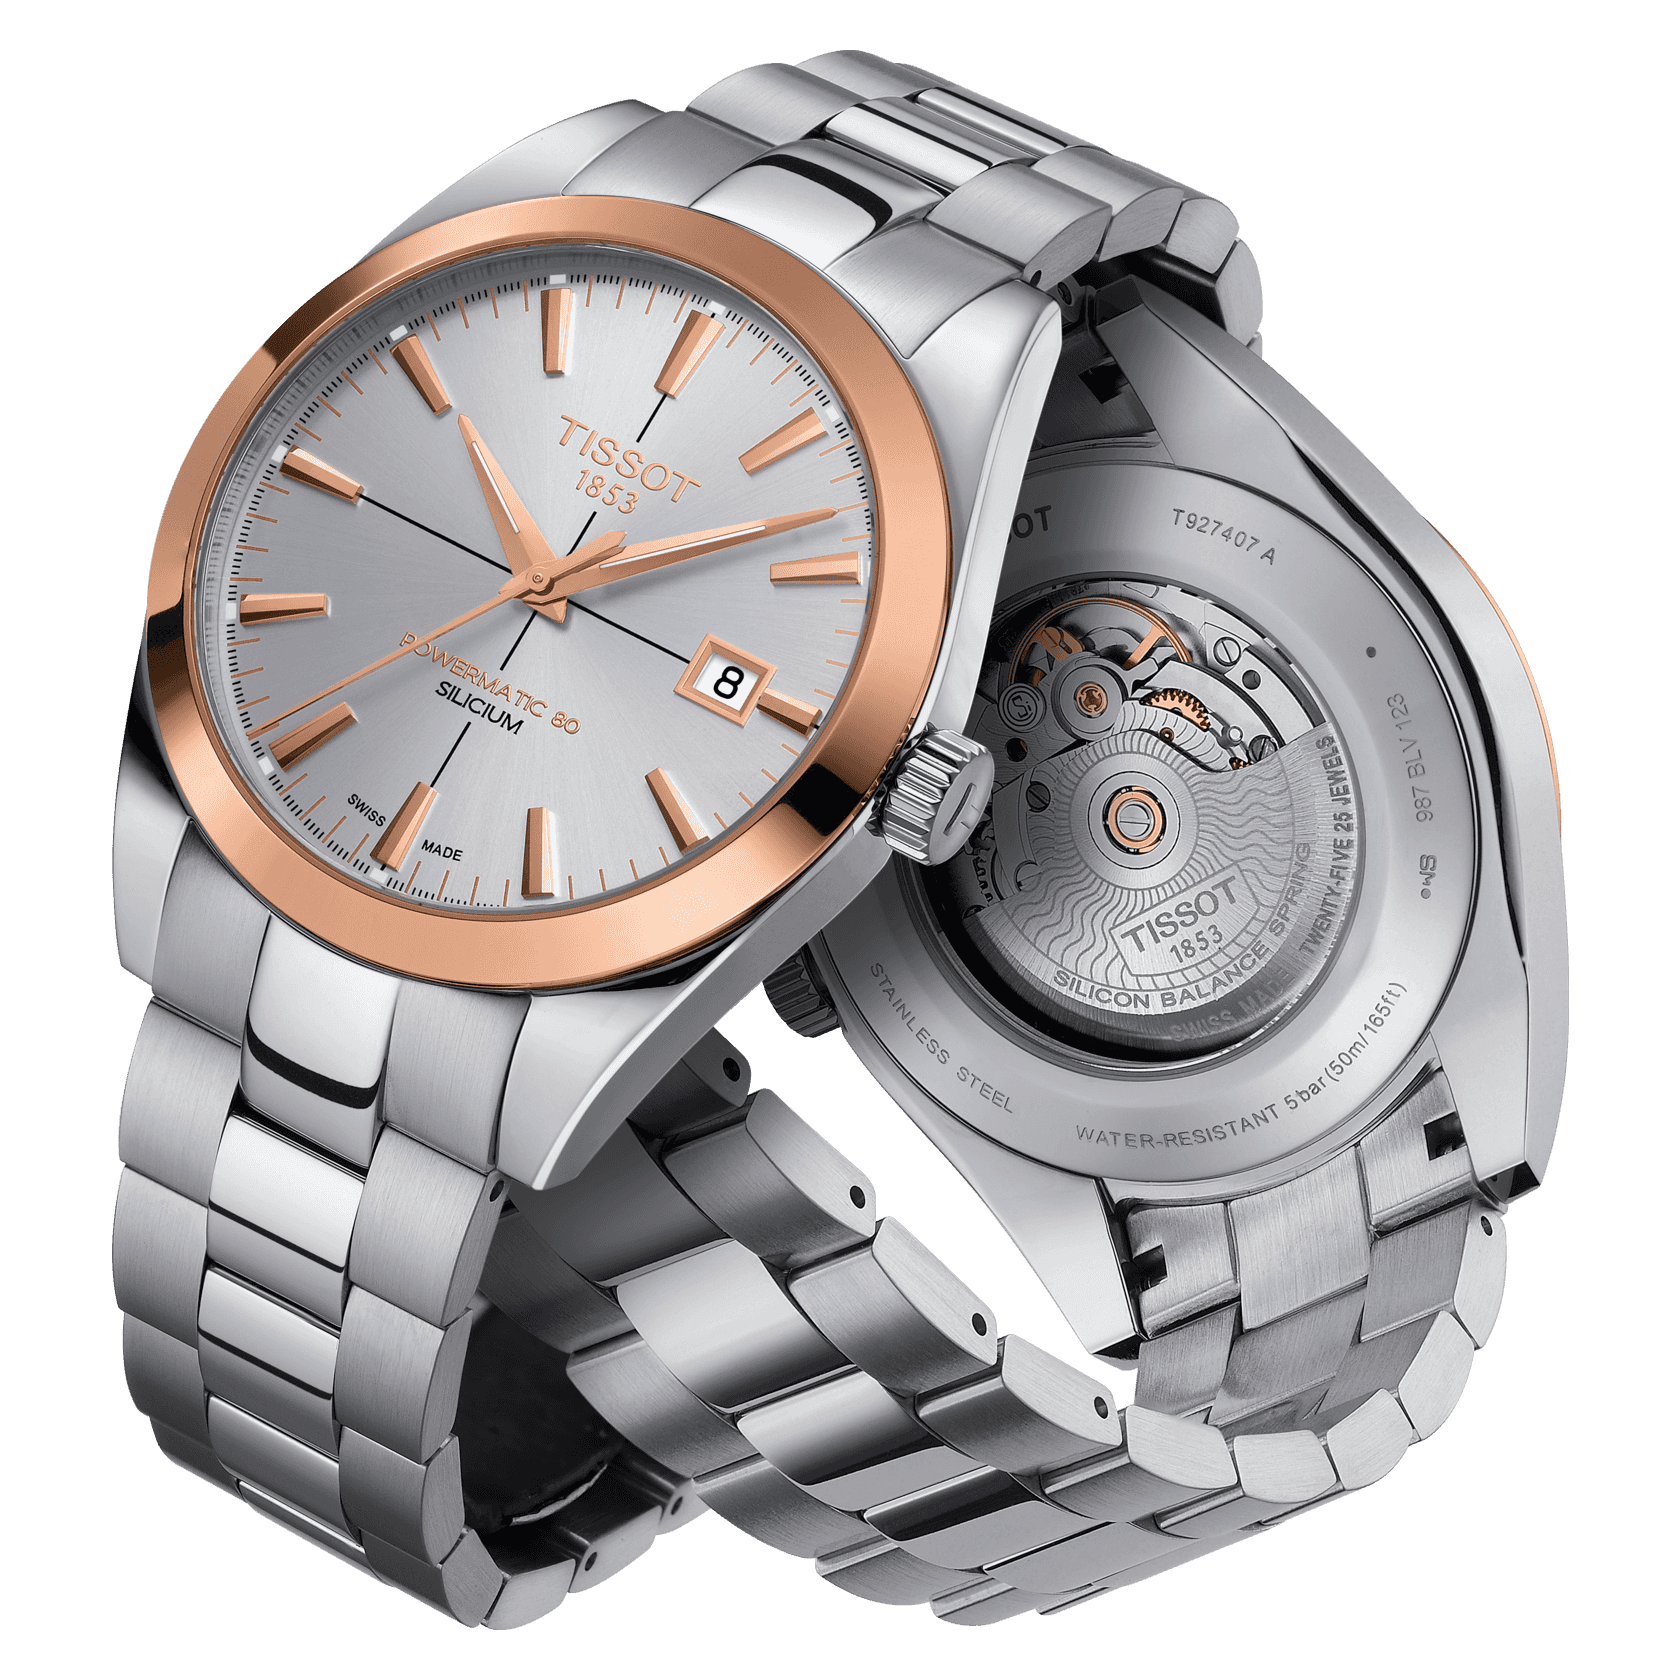 Habring Replica Watches